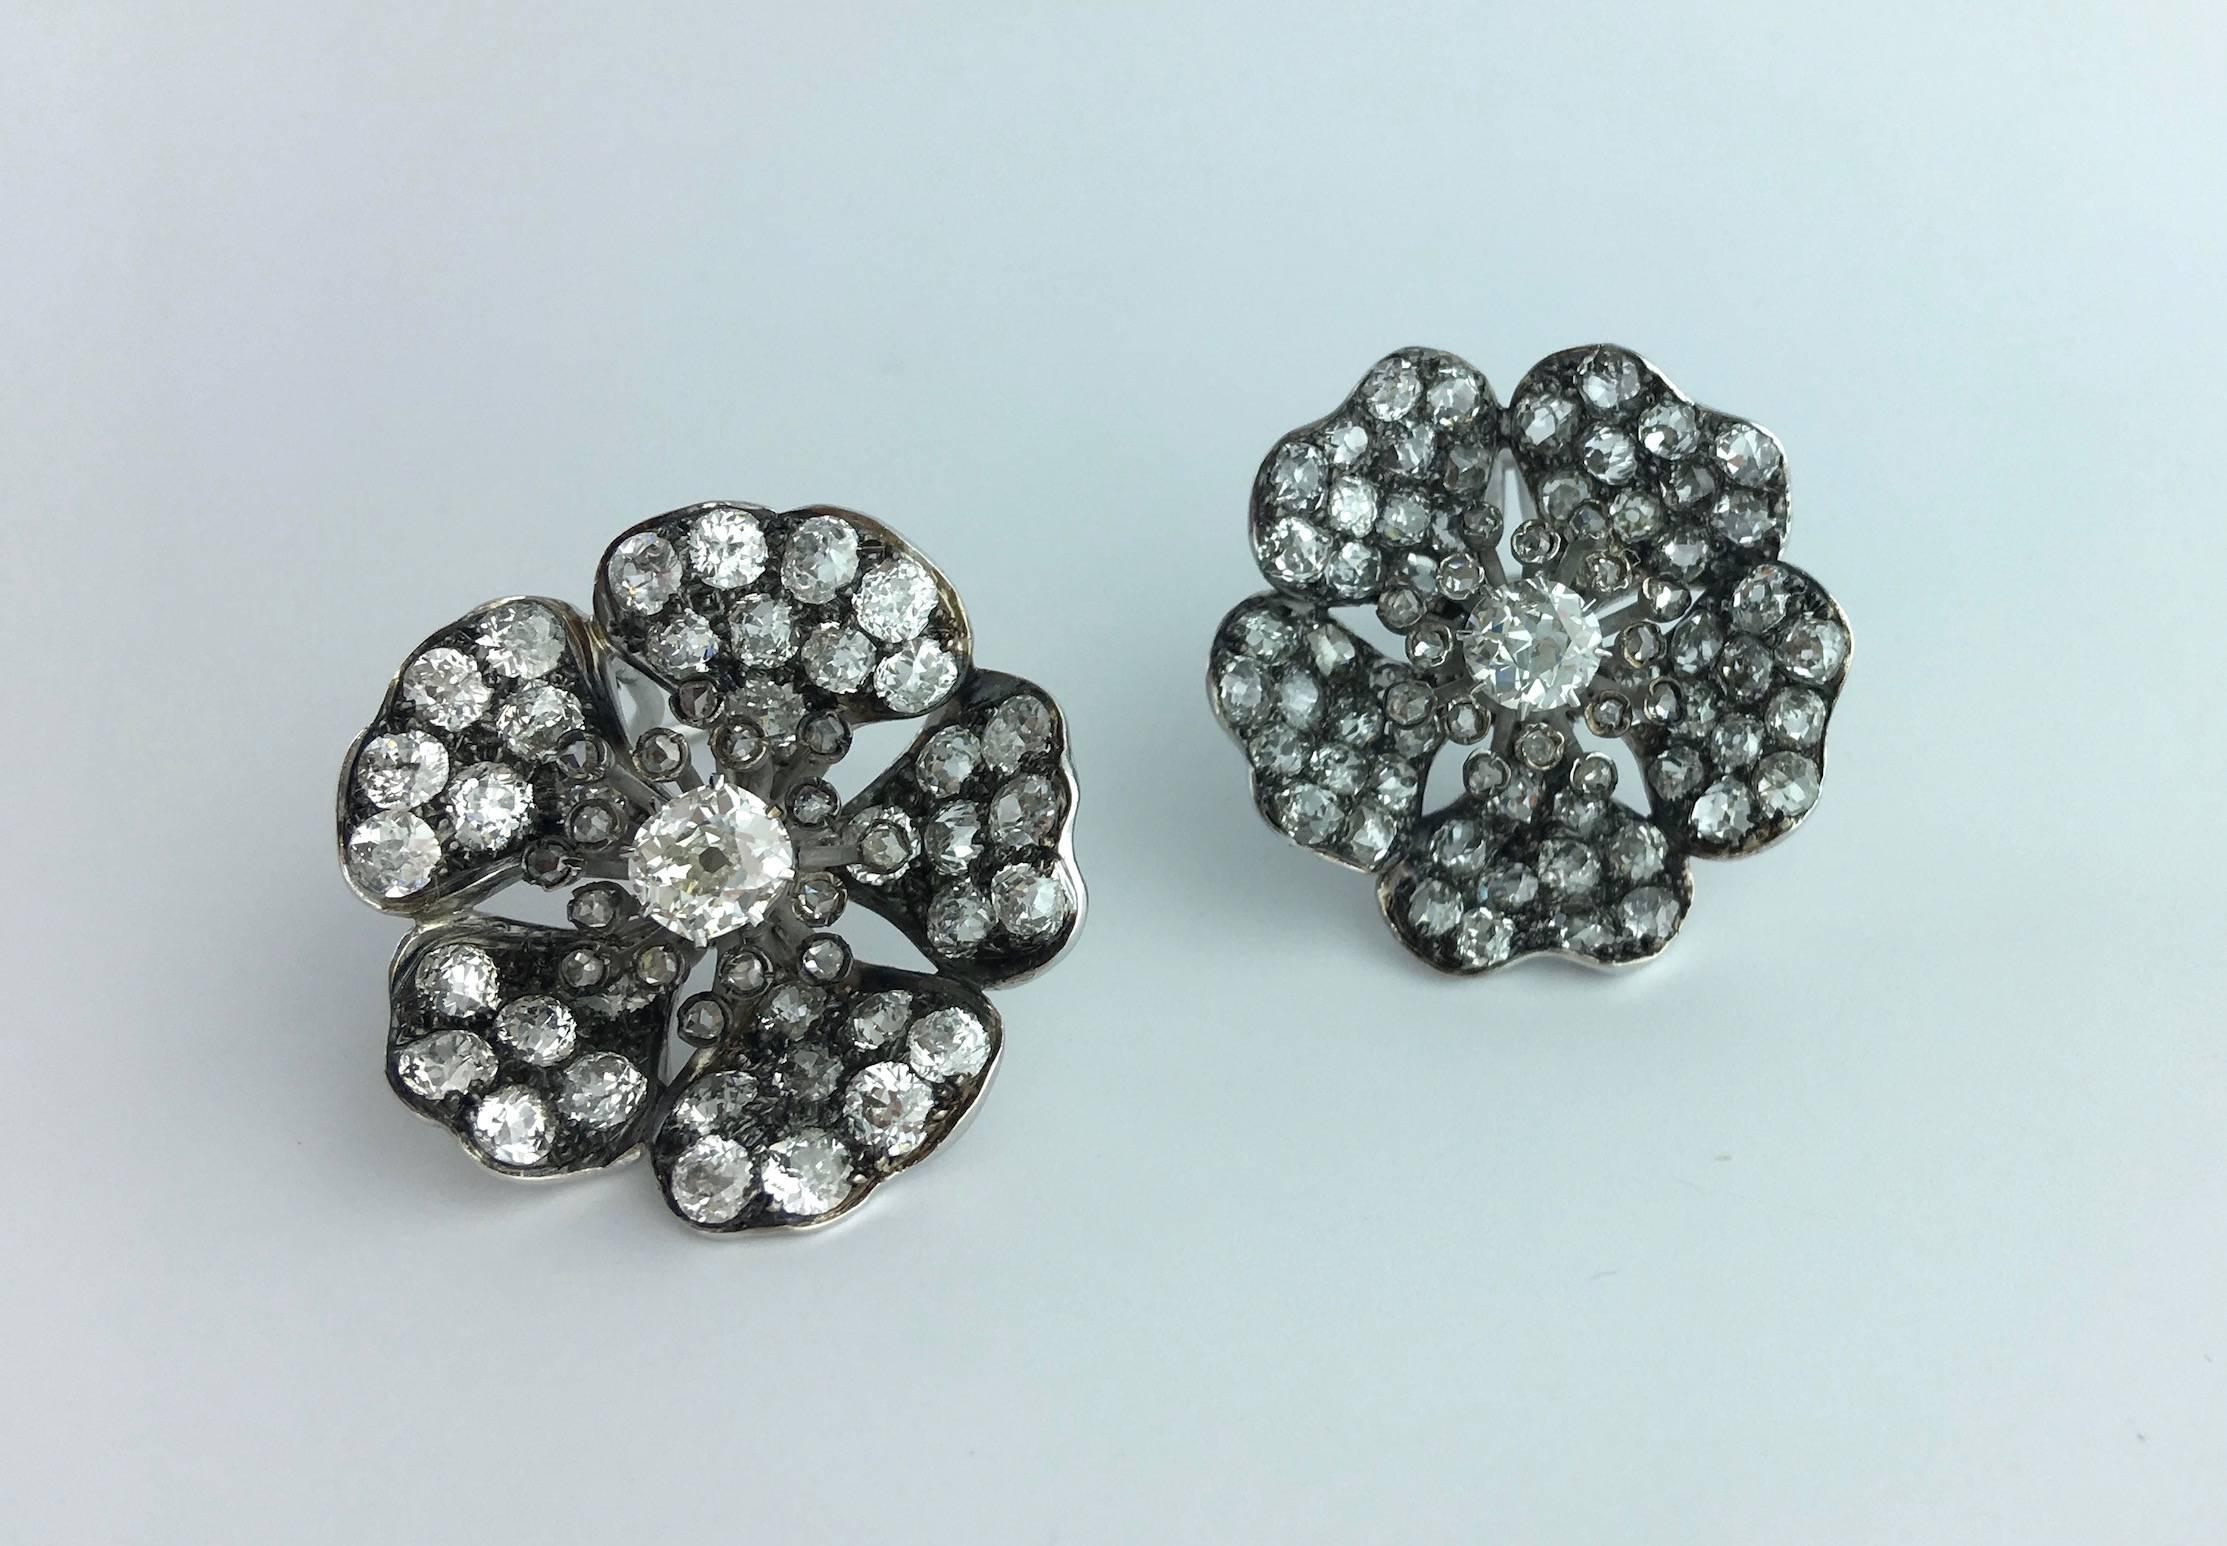 Those Flower Earclips are totally amazing!
Old mine cut diamond on gold and platinum. 
In our opinion approximately 7.00 carats total.

Gross weight: 18.57 grams.